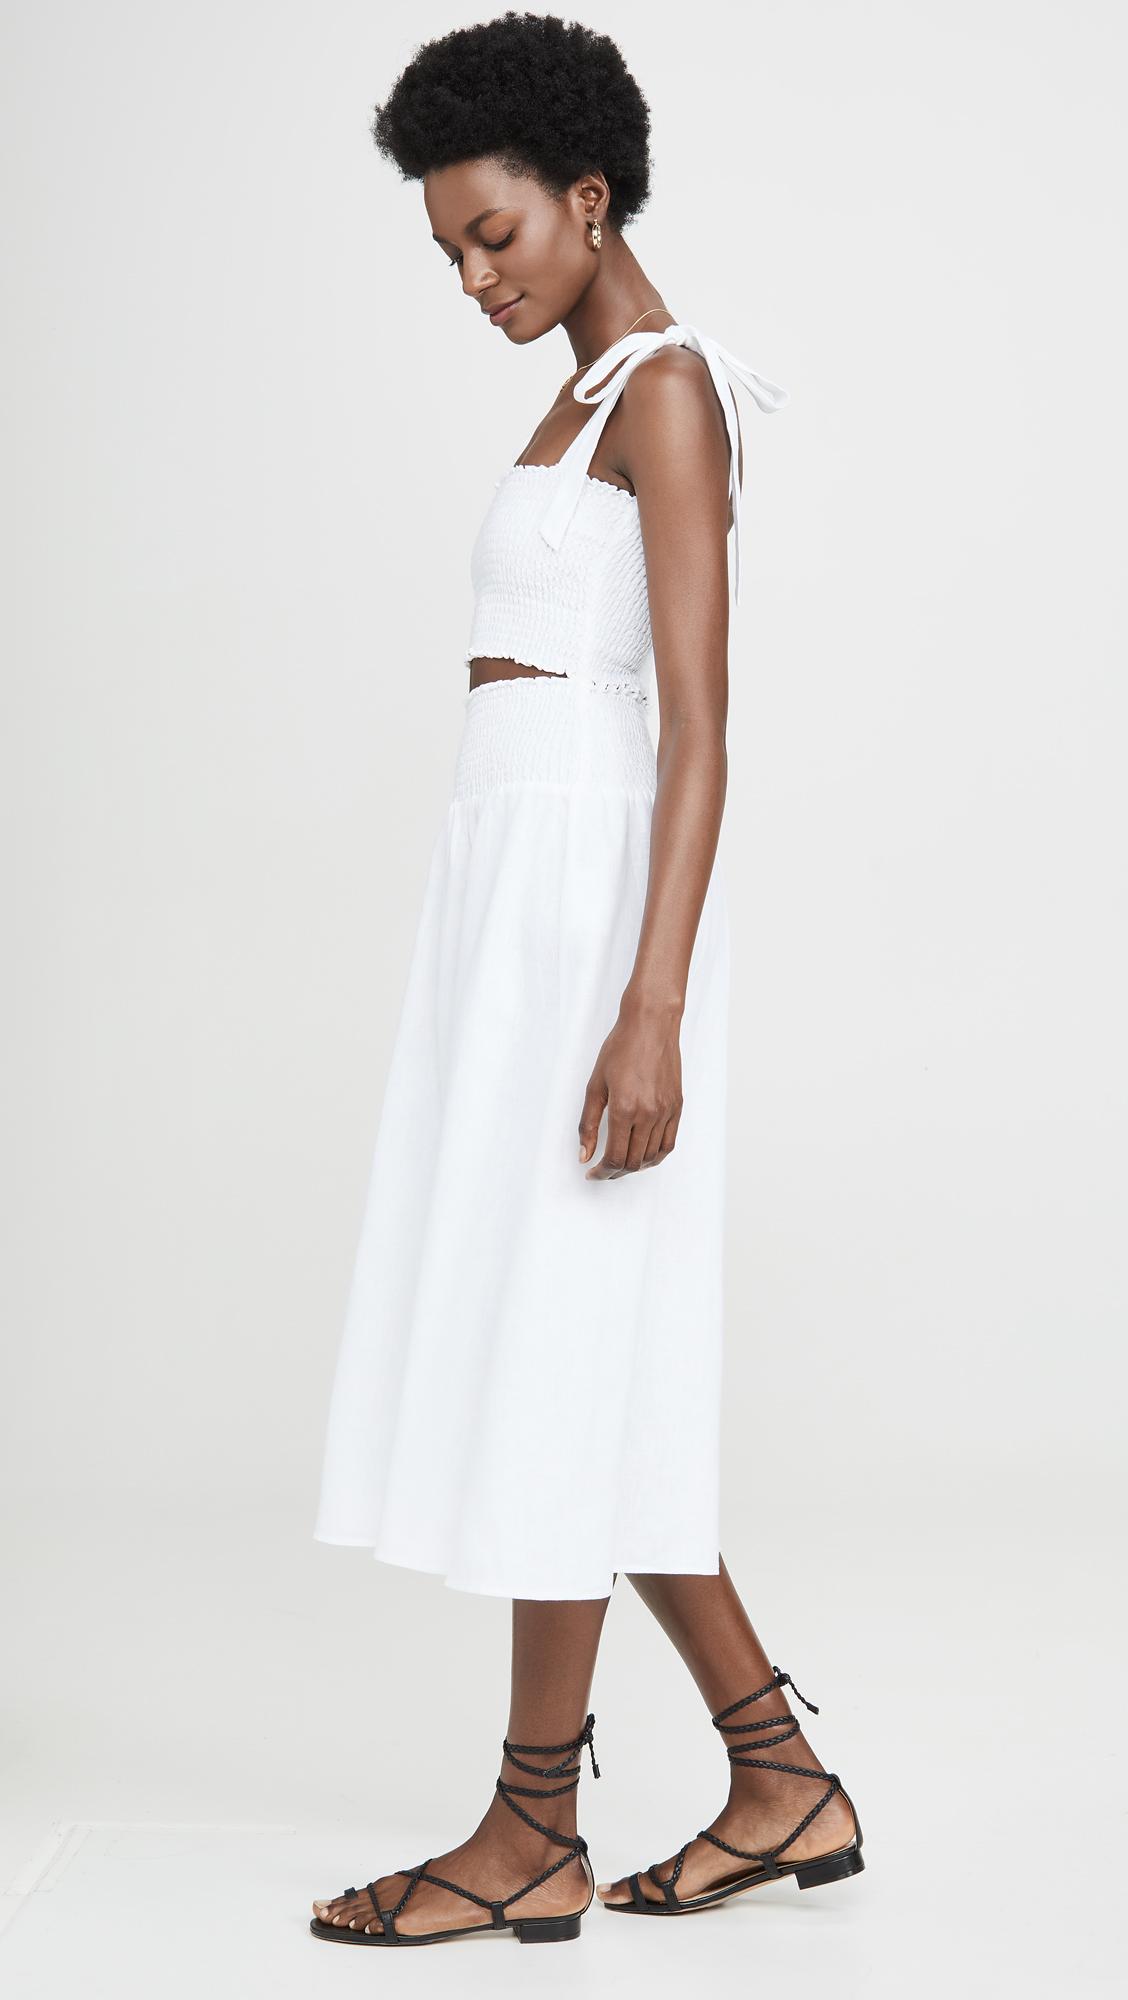 Reformation Linen Willow Two Piece Set in White - Lyst